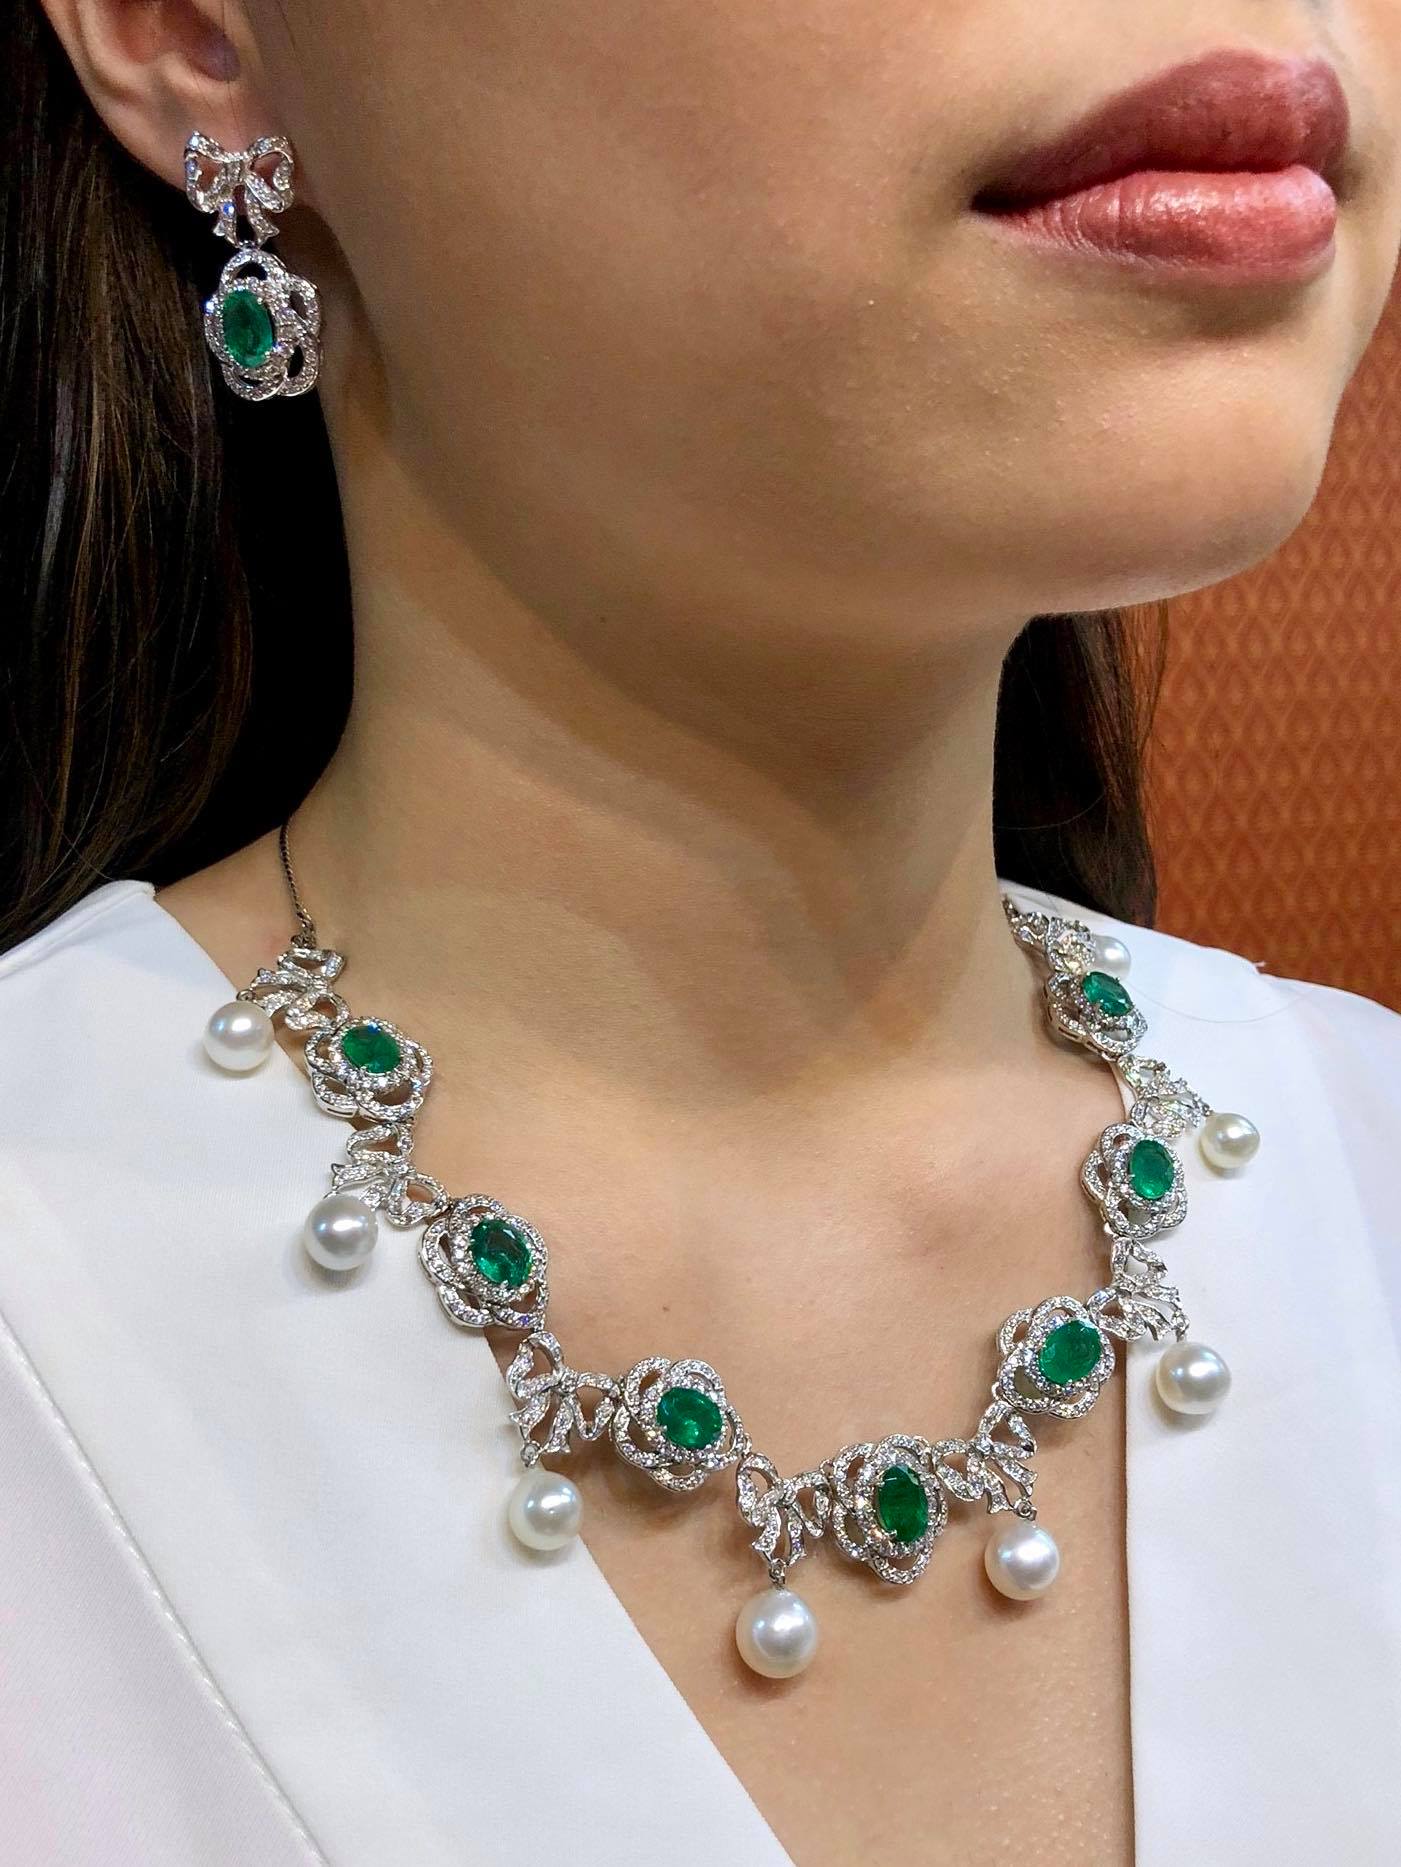 Cute & Lovely! With South Sea Pearls and Genuine Emeralds and Diamonds in bow-design necklace!